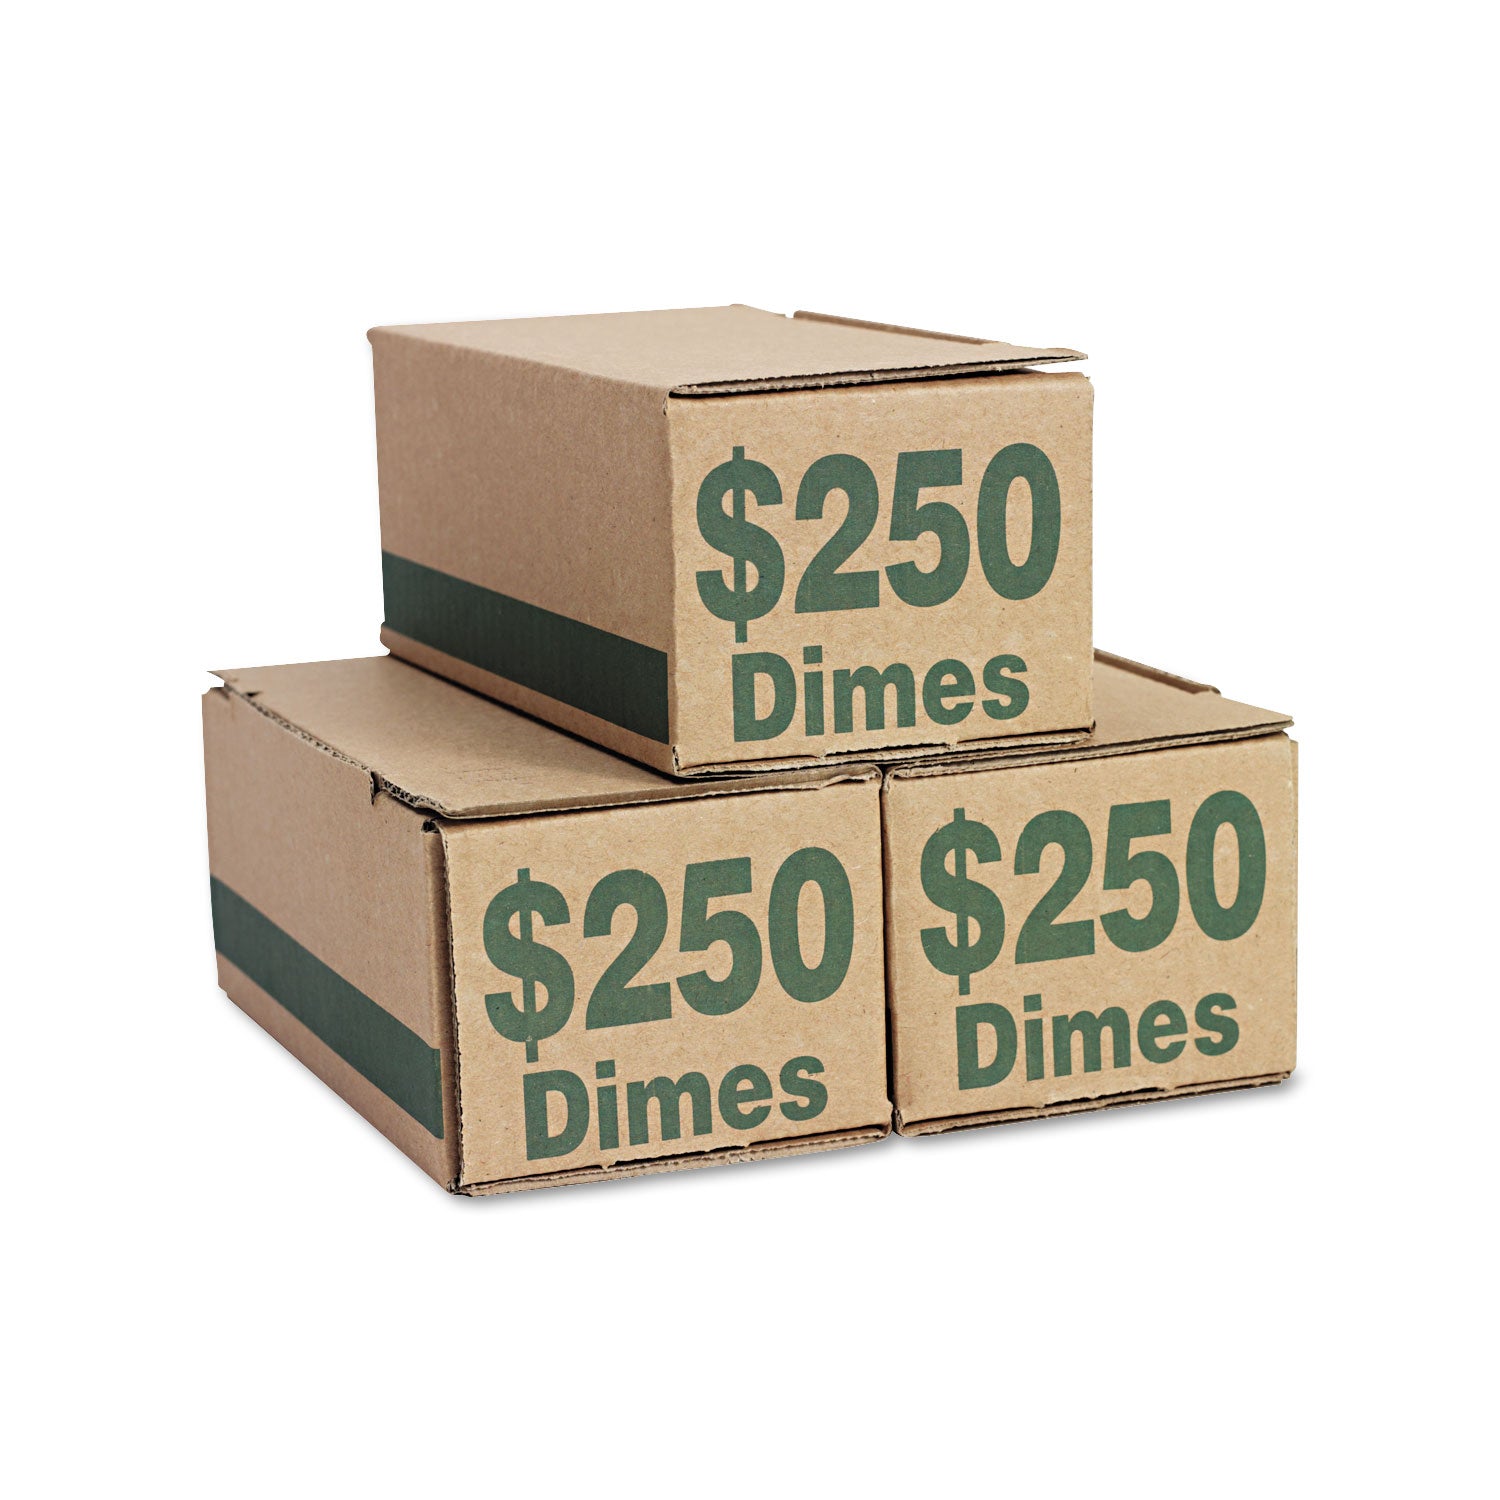 corrugated-cardboard-coin-storage-with-denomination-printed-on-side-806-x-331-x-319-green_icx94190088 - 3